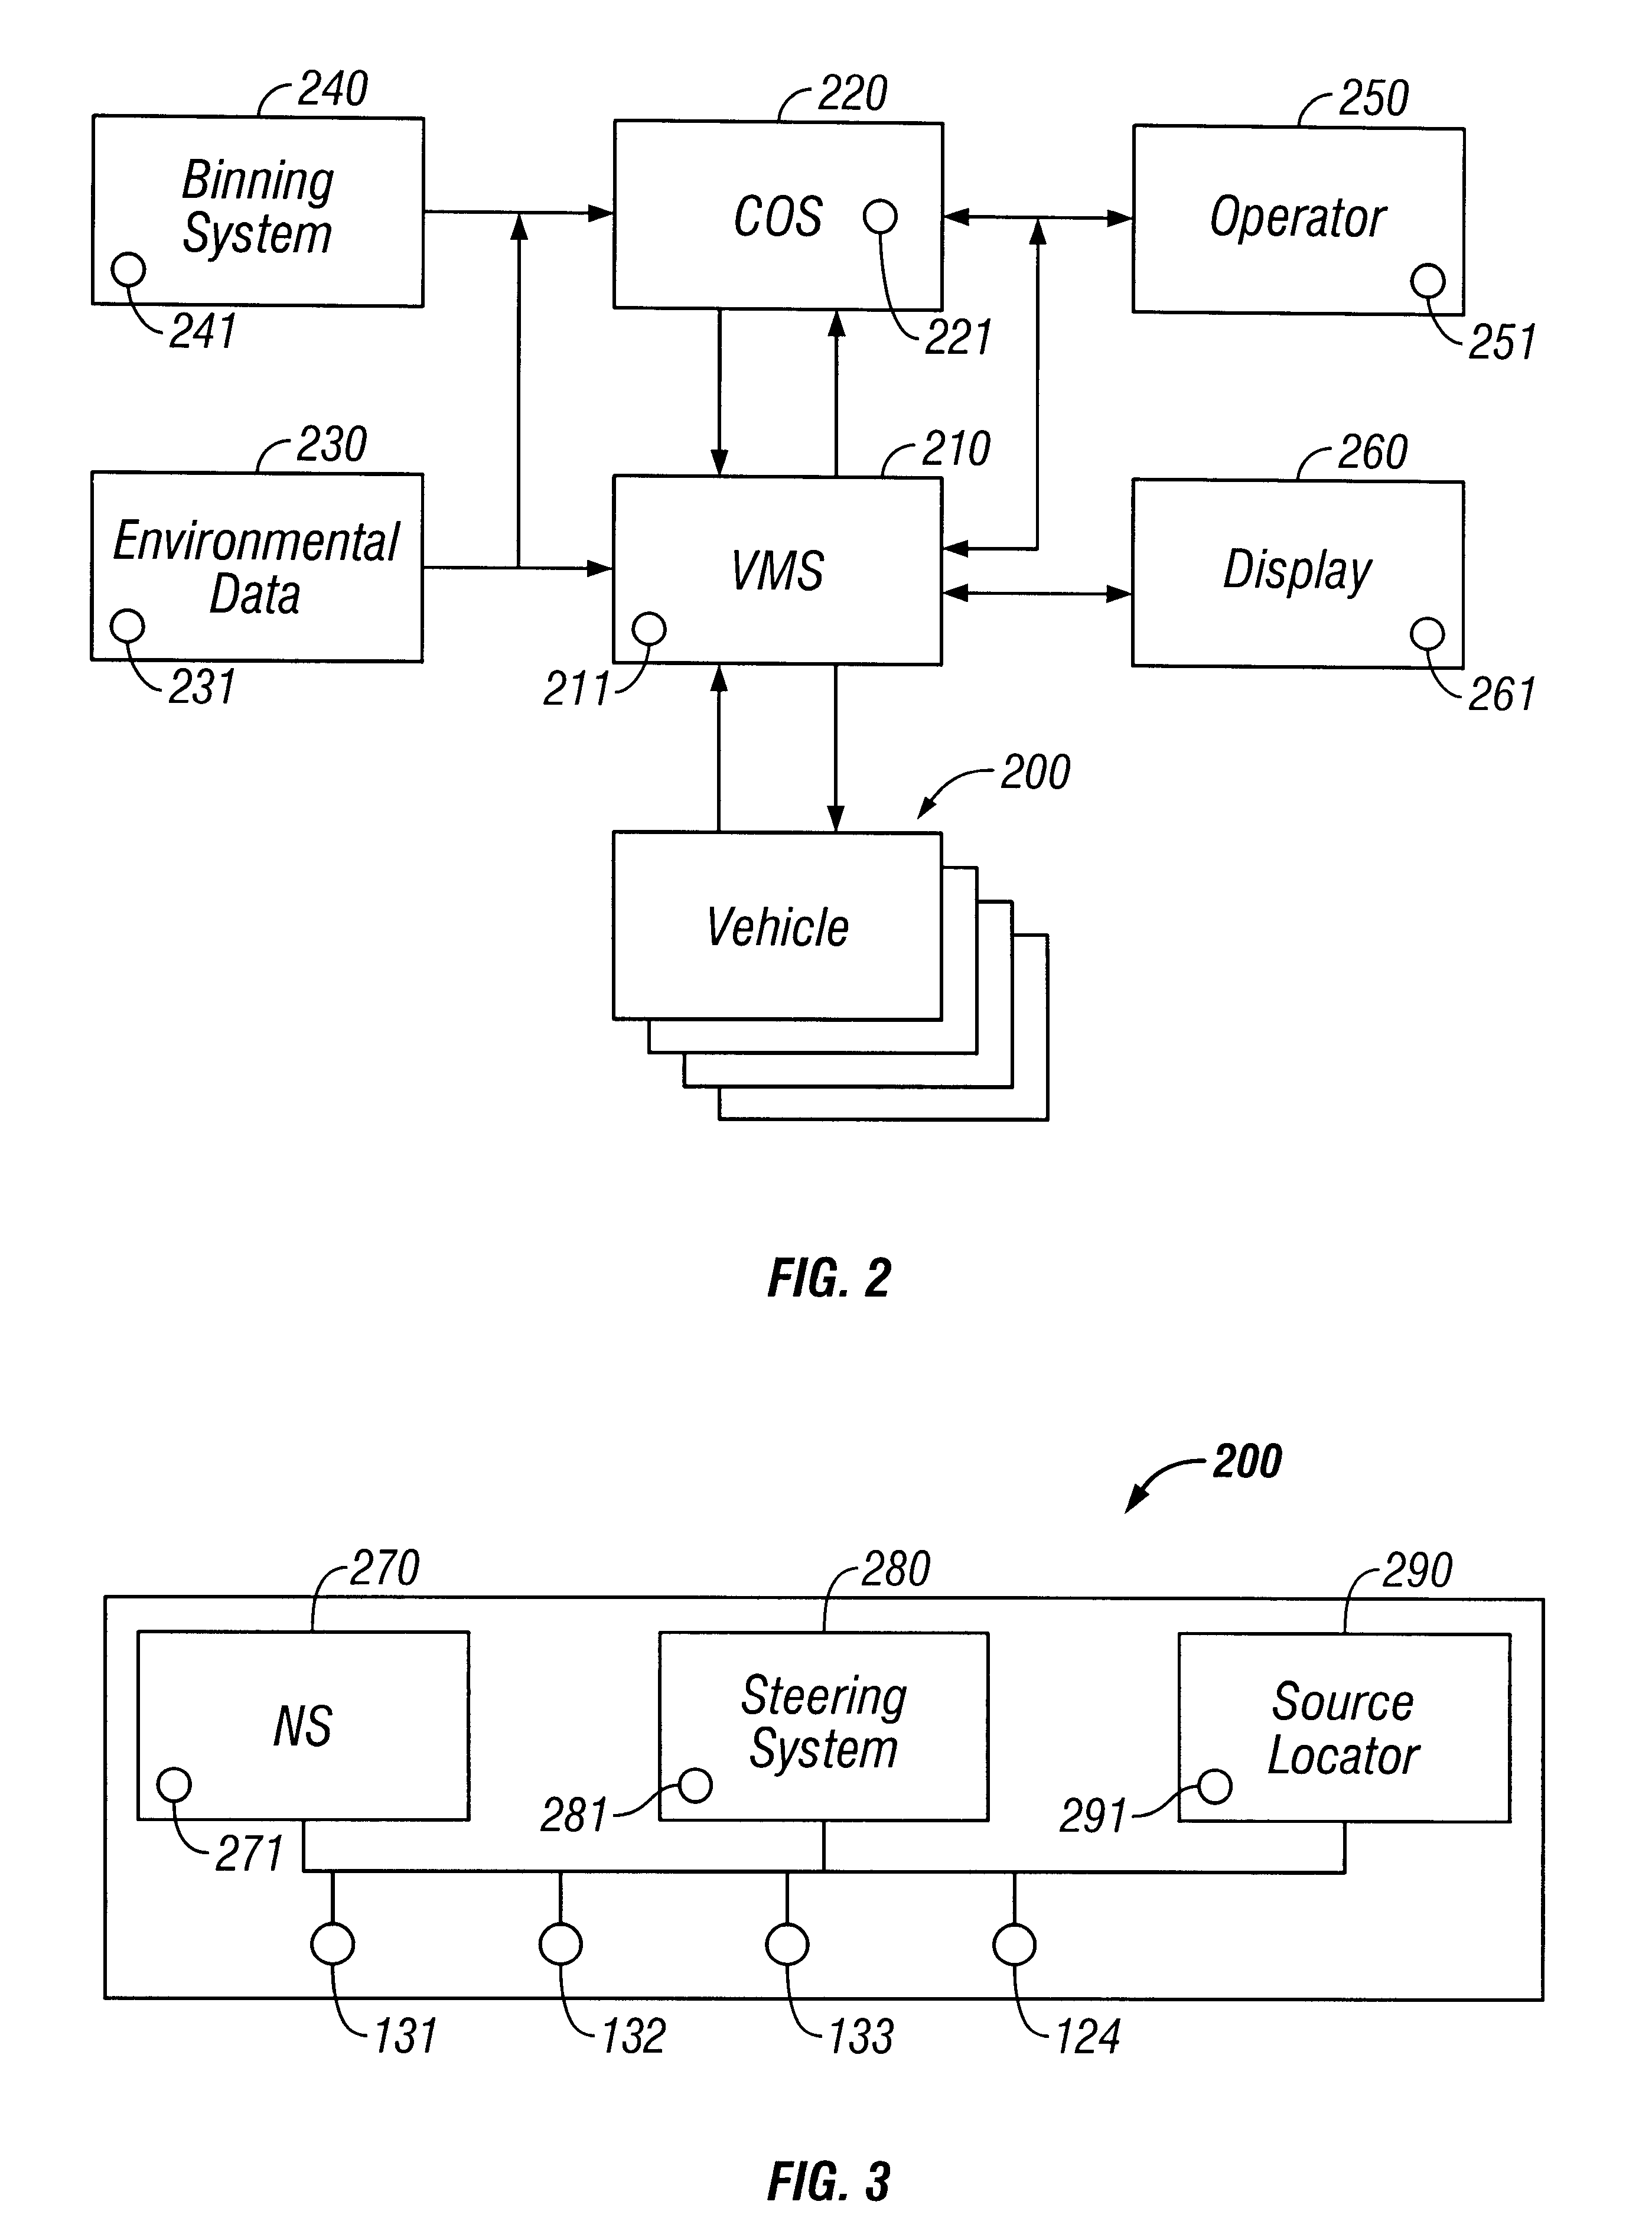 Method and apparatus for controlling and optimizing seismic data acquisition